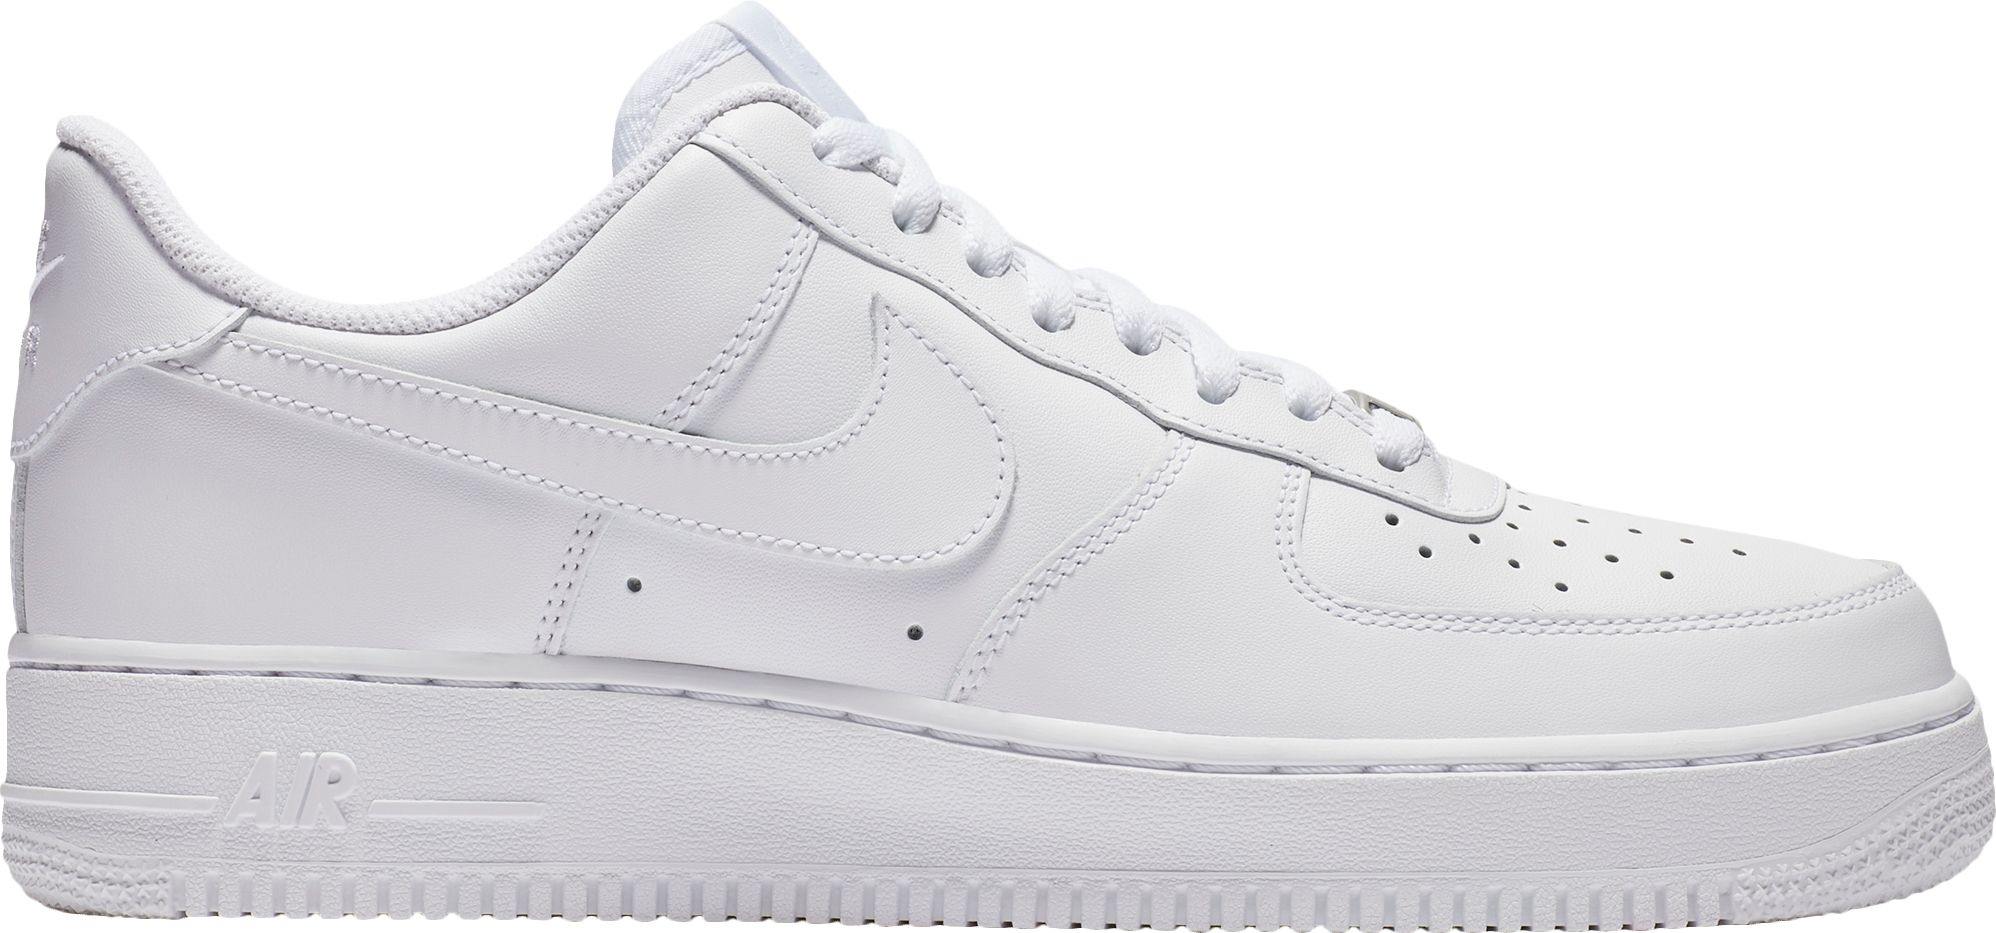 where to buy air force 1s